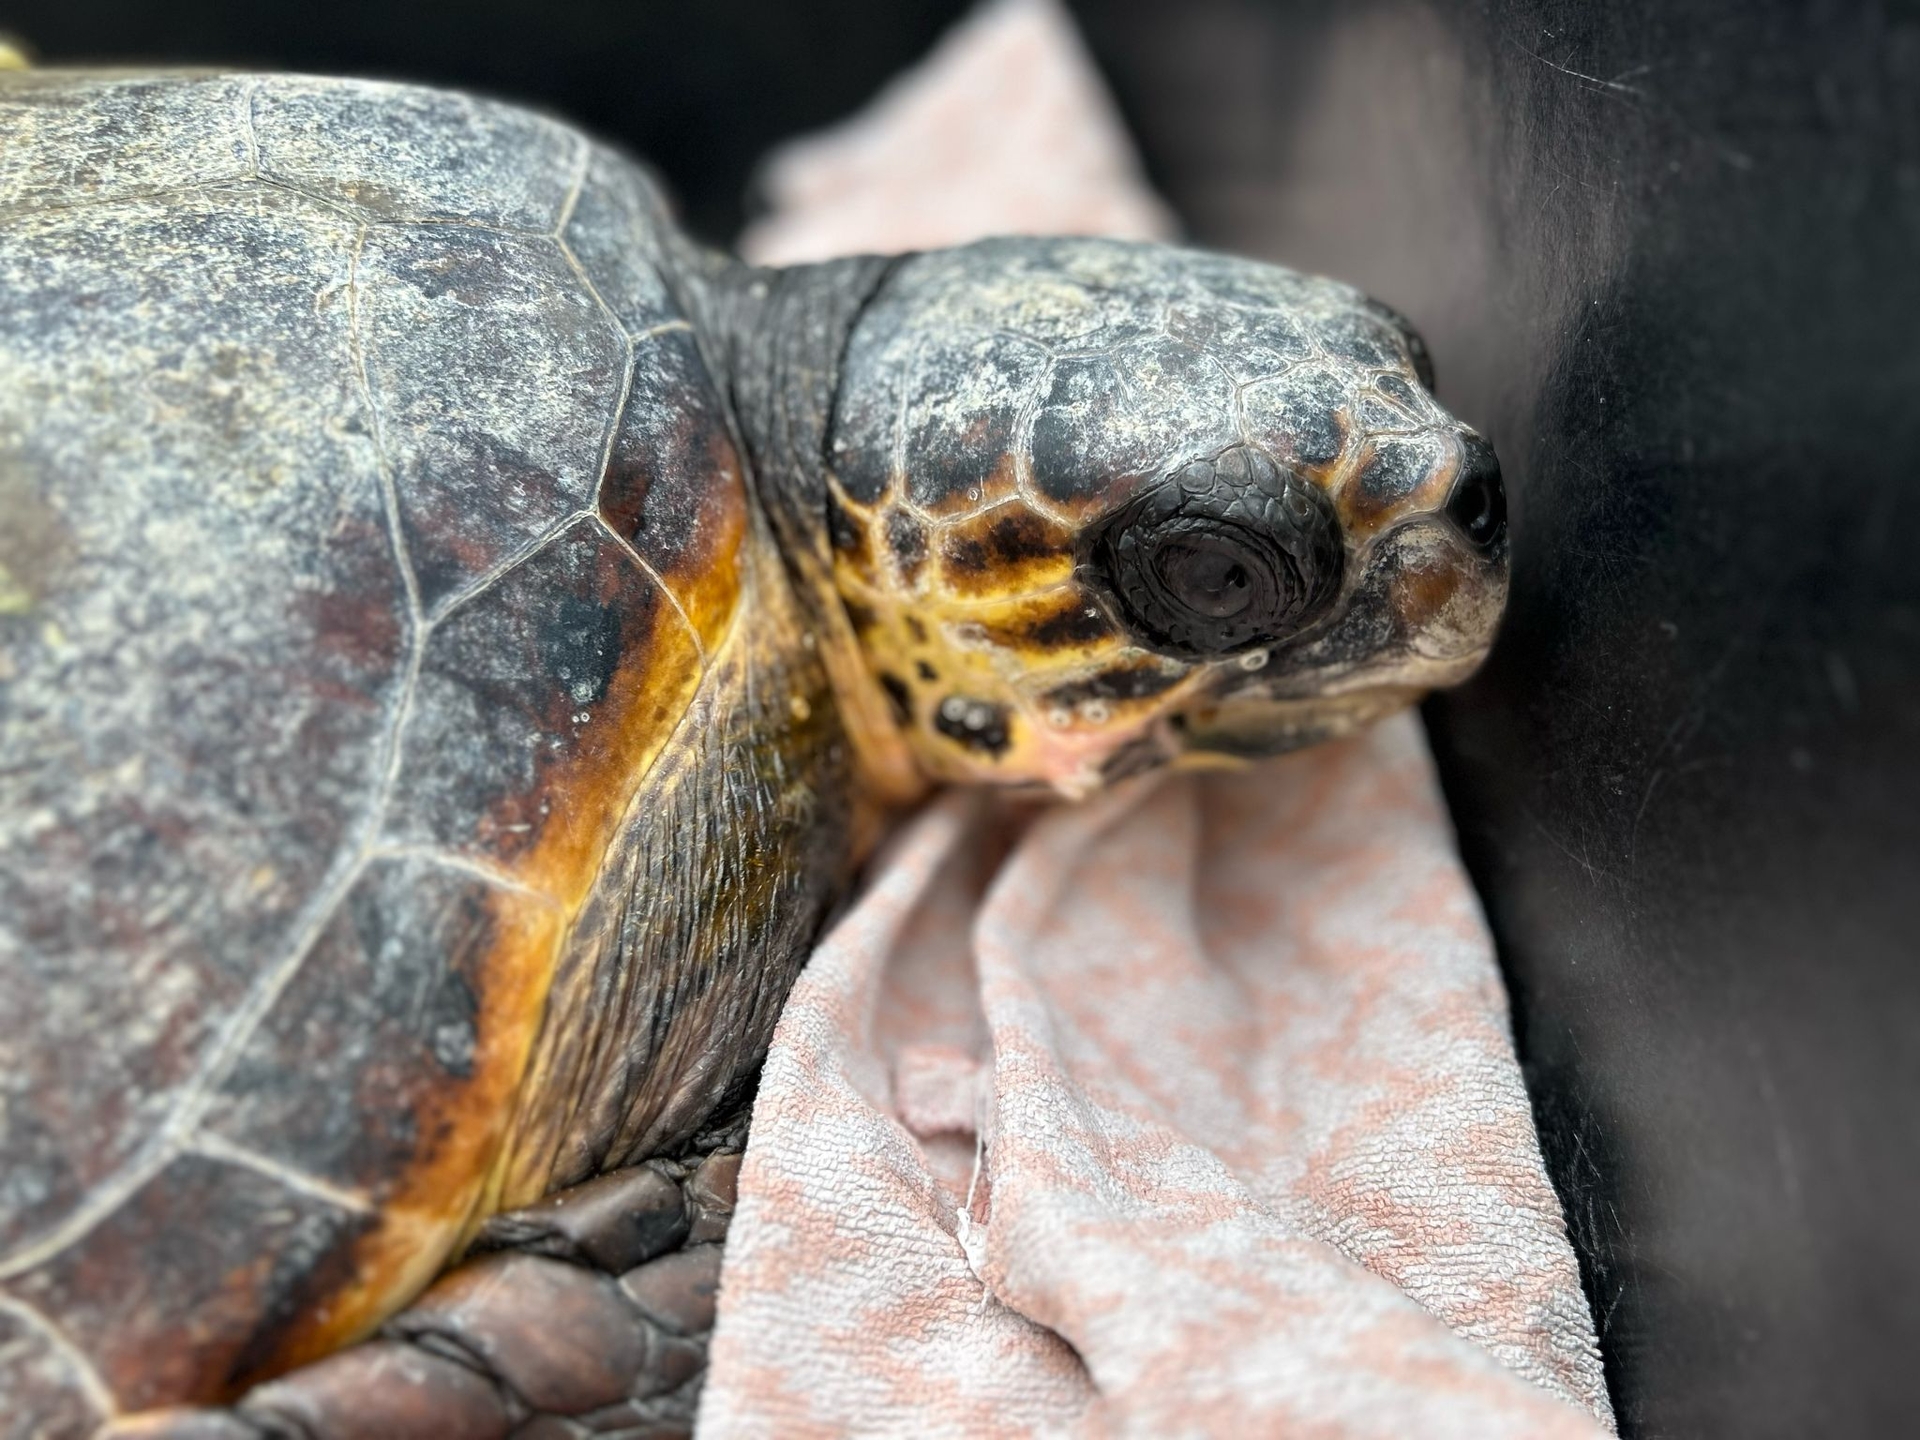 Sea turtle treated at the Rescue Centre named Dumpling